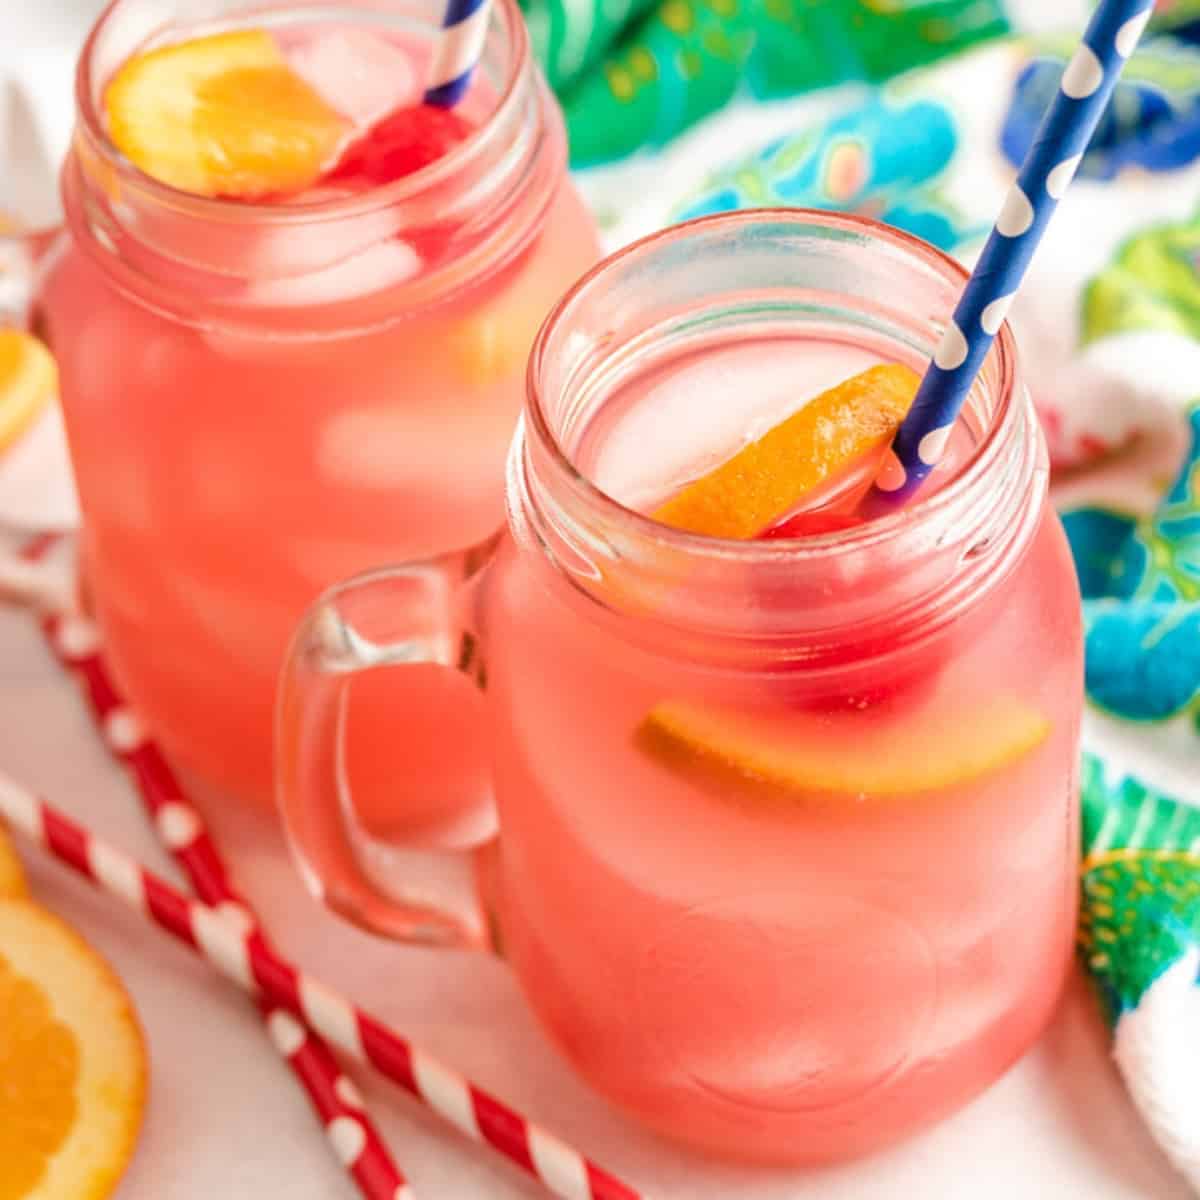 https://www.berlyskitchen.com/wp-content/uploads/2020/07/Party-Punch-Featured-Image.jpg